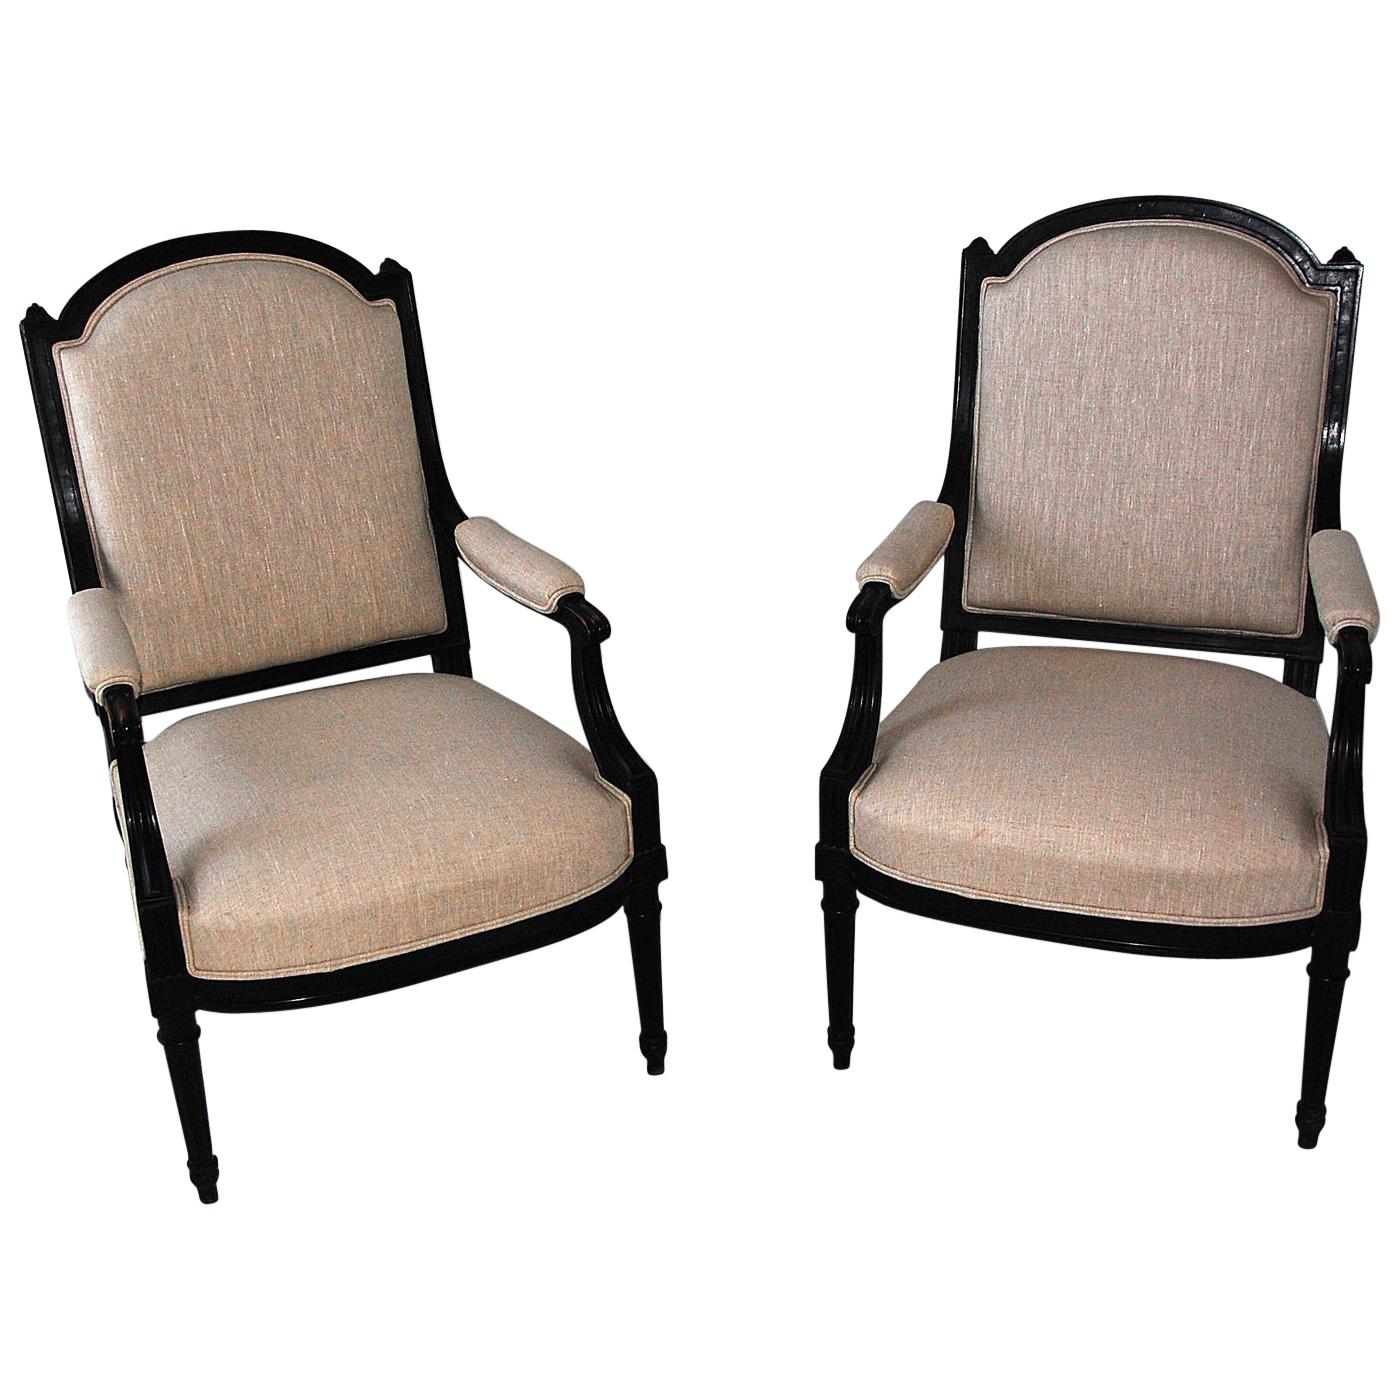 French Louis XVI Revival Ebonized Pair of Upholstered Lounging Chairs, Fauteuils